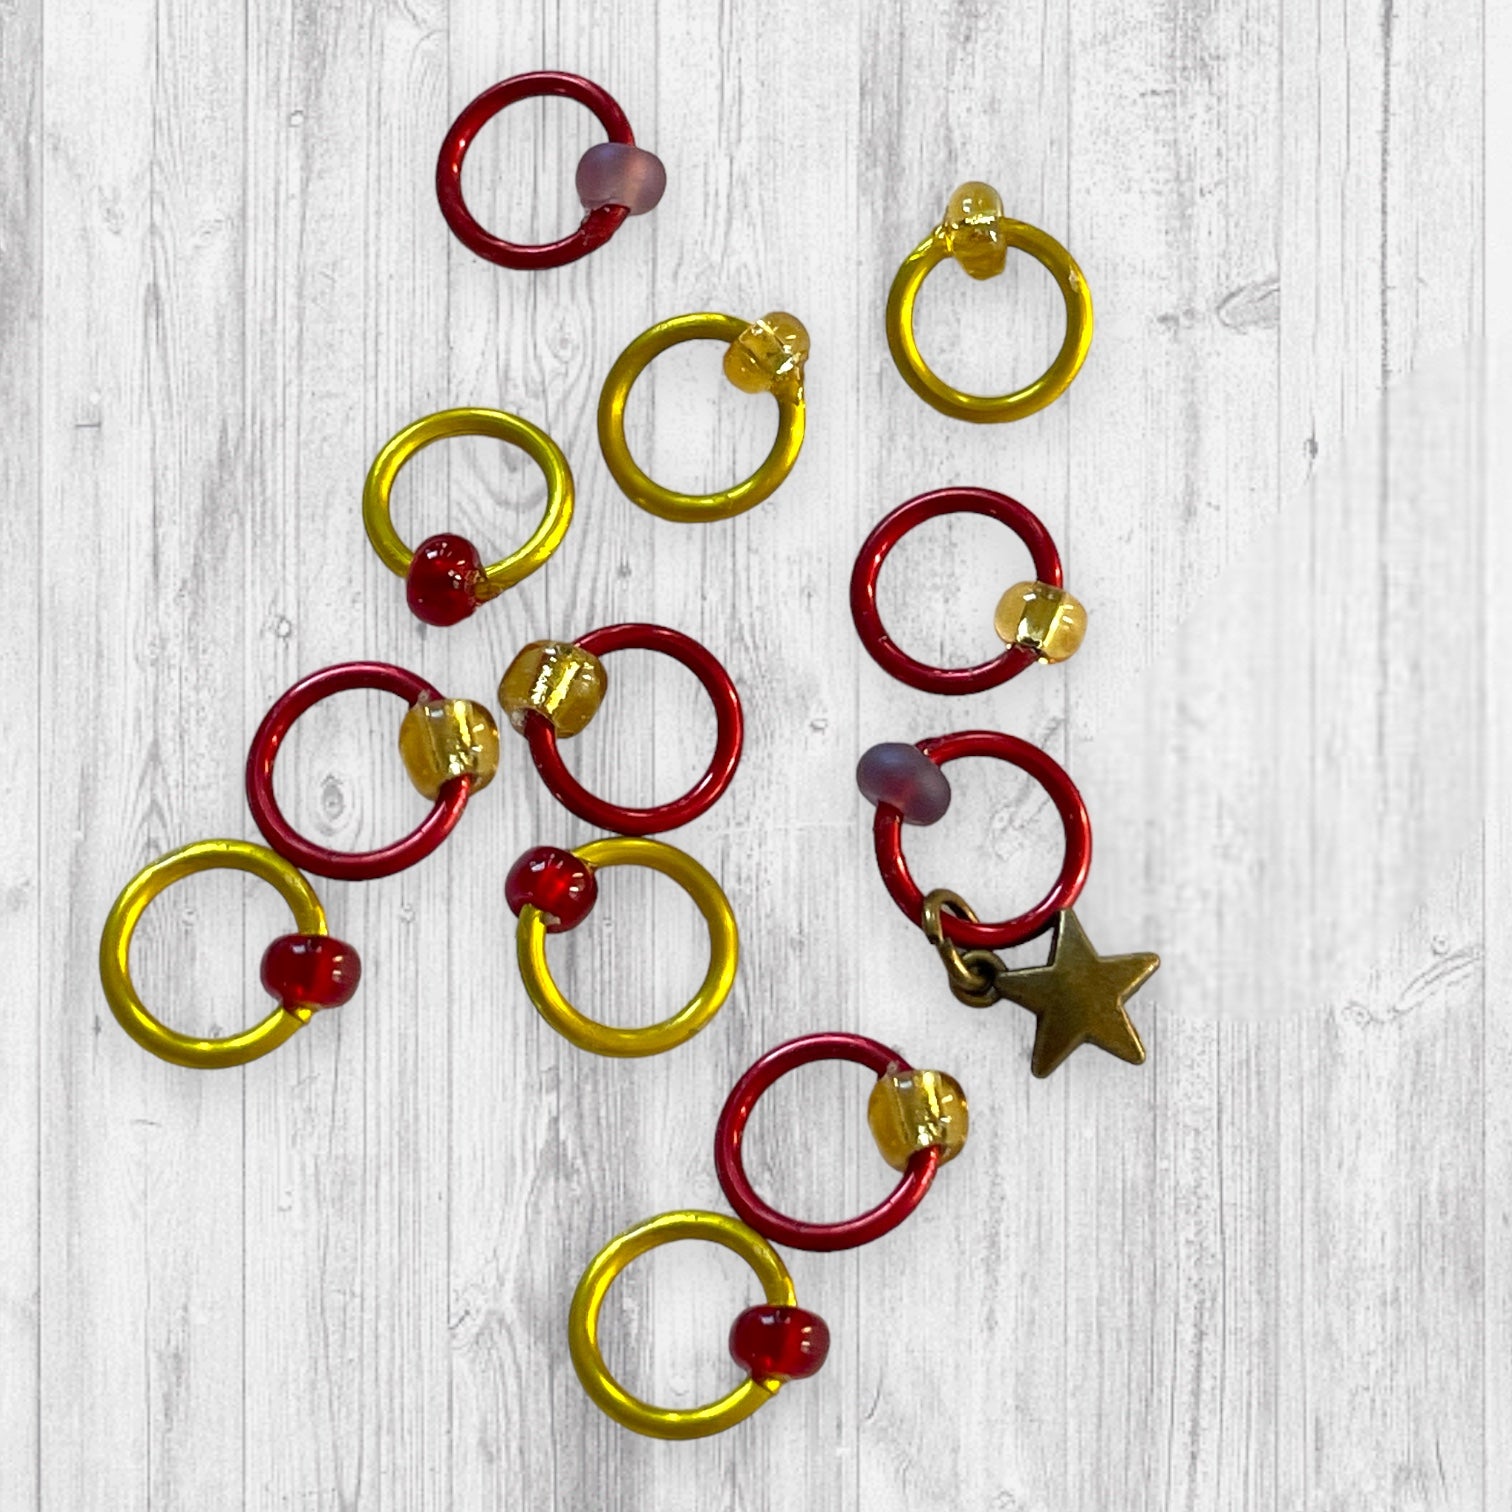 Red and Gold Crest Progress and Stitch Markers - AdoreKnit